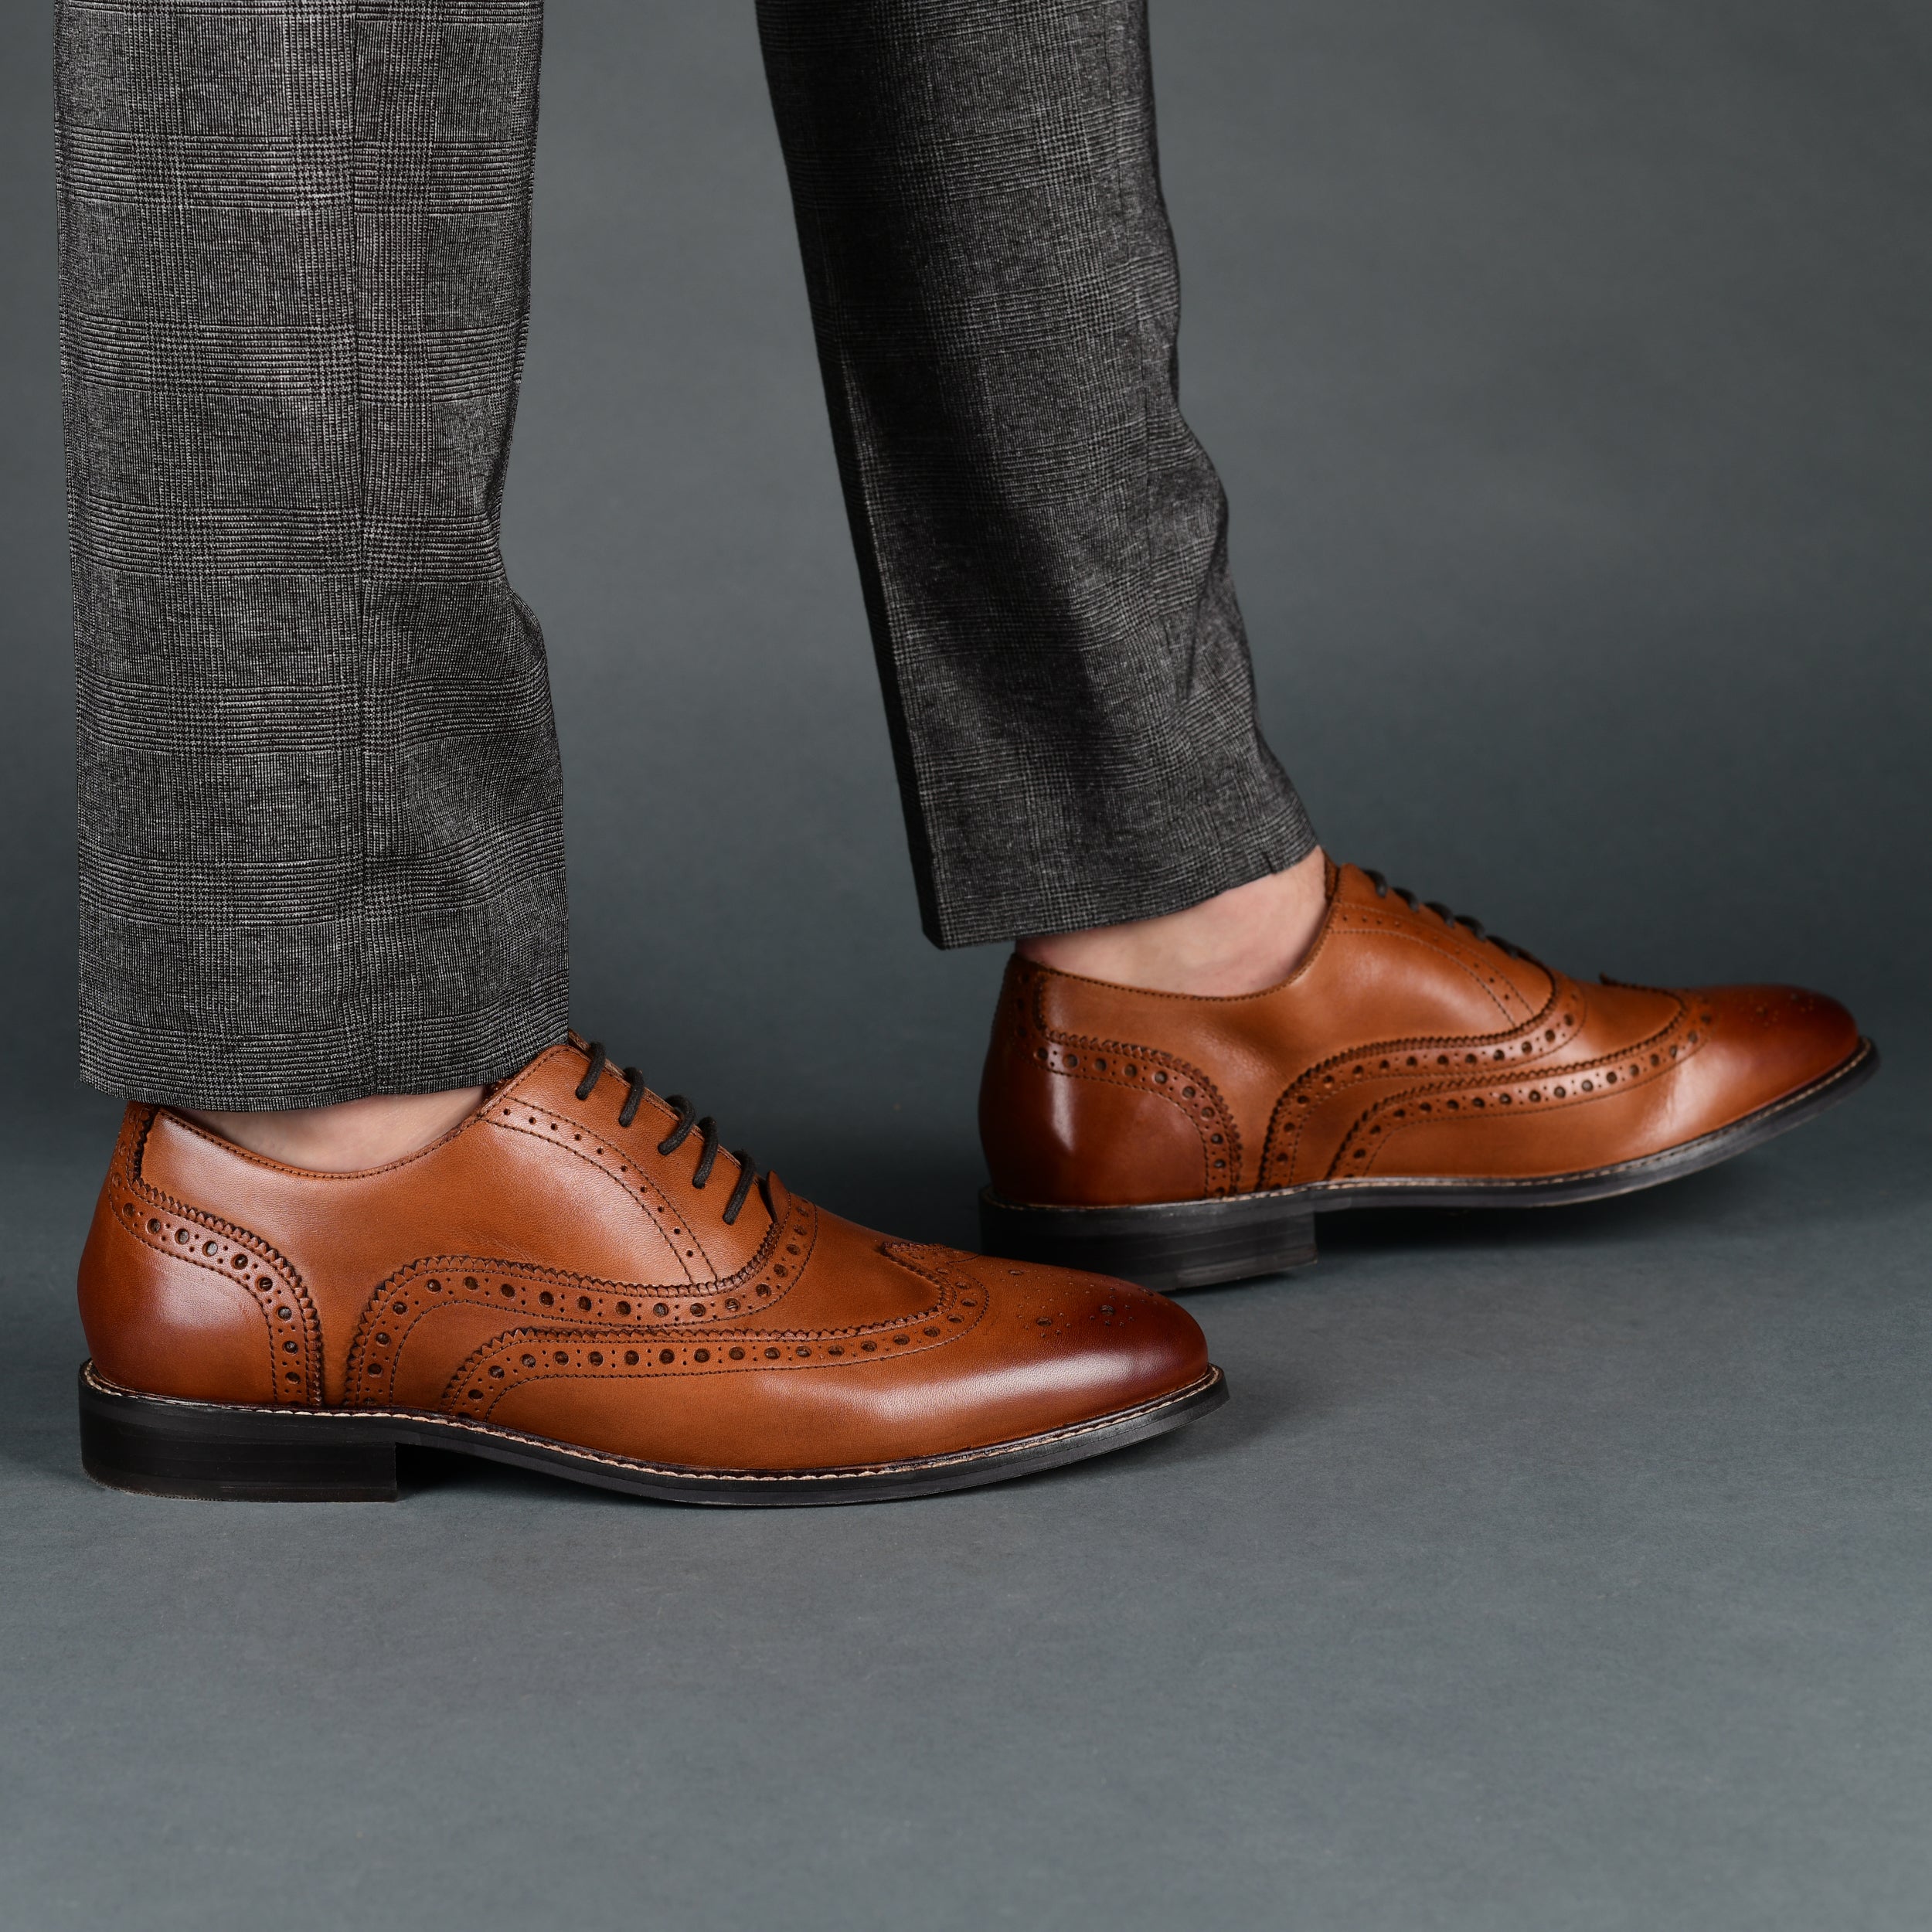 men’s dress shoes in wide sizes